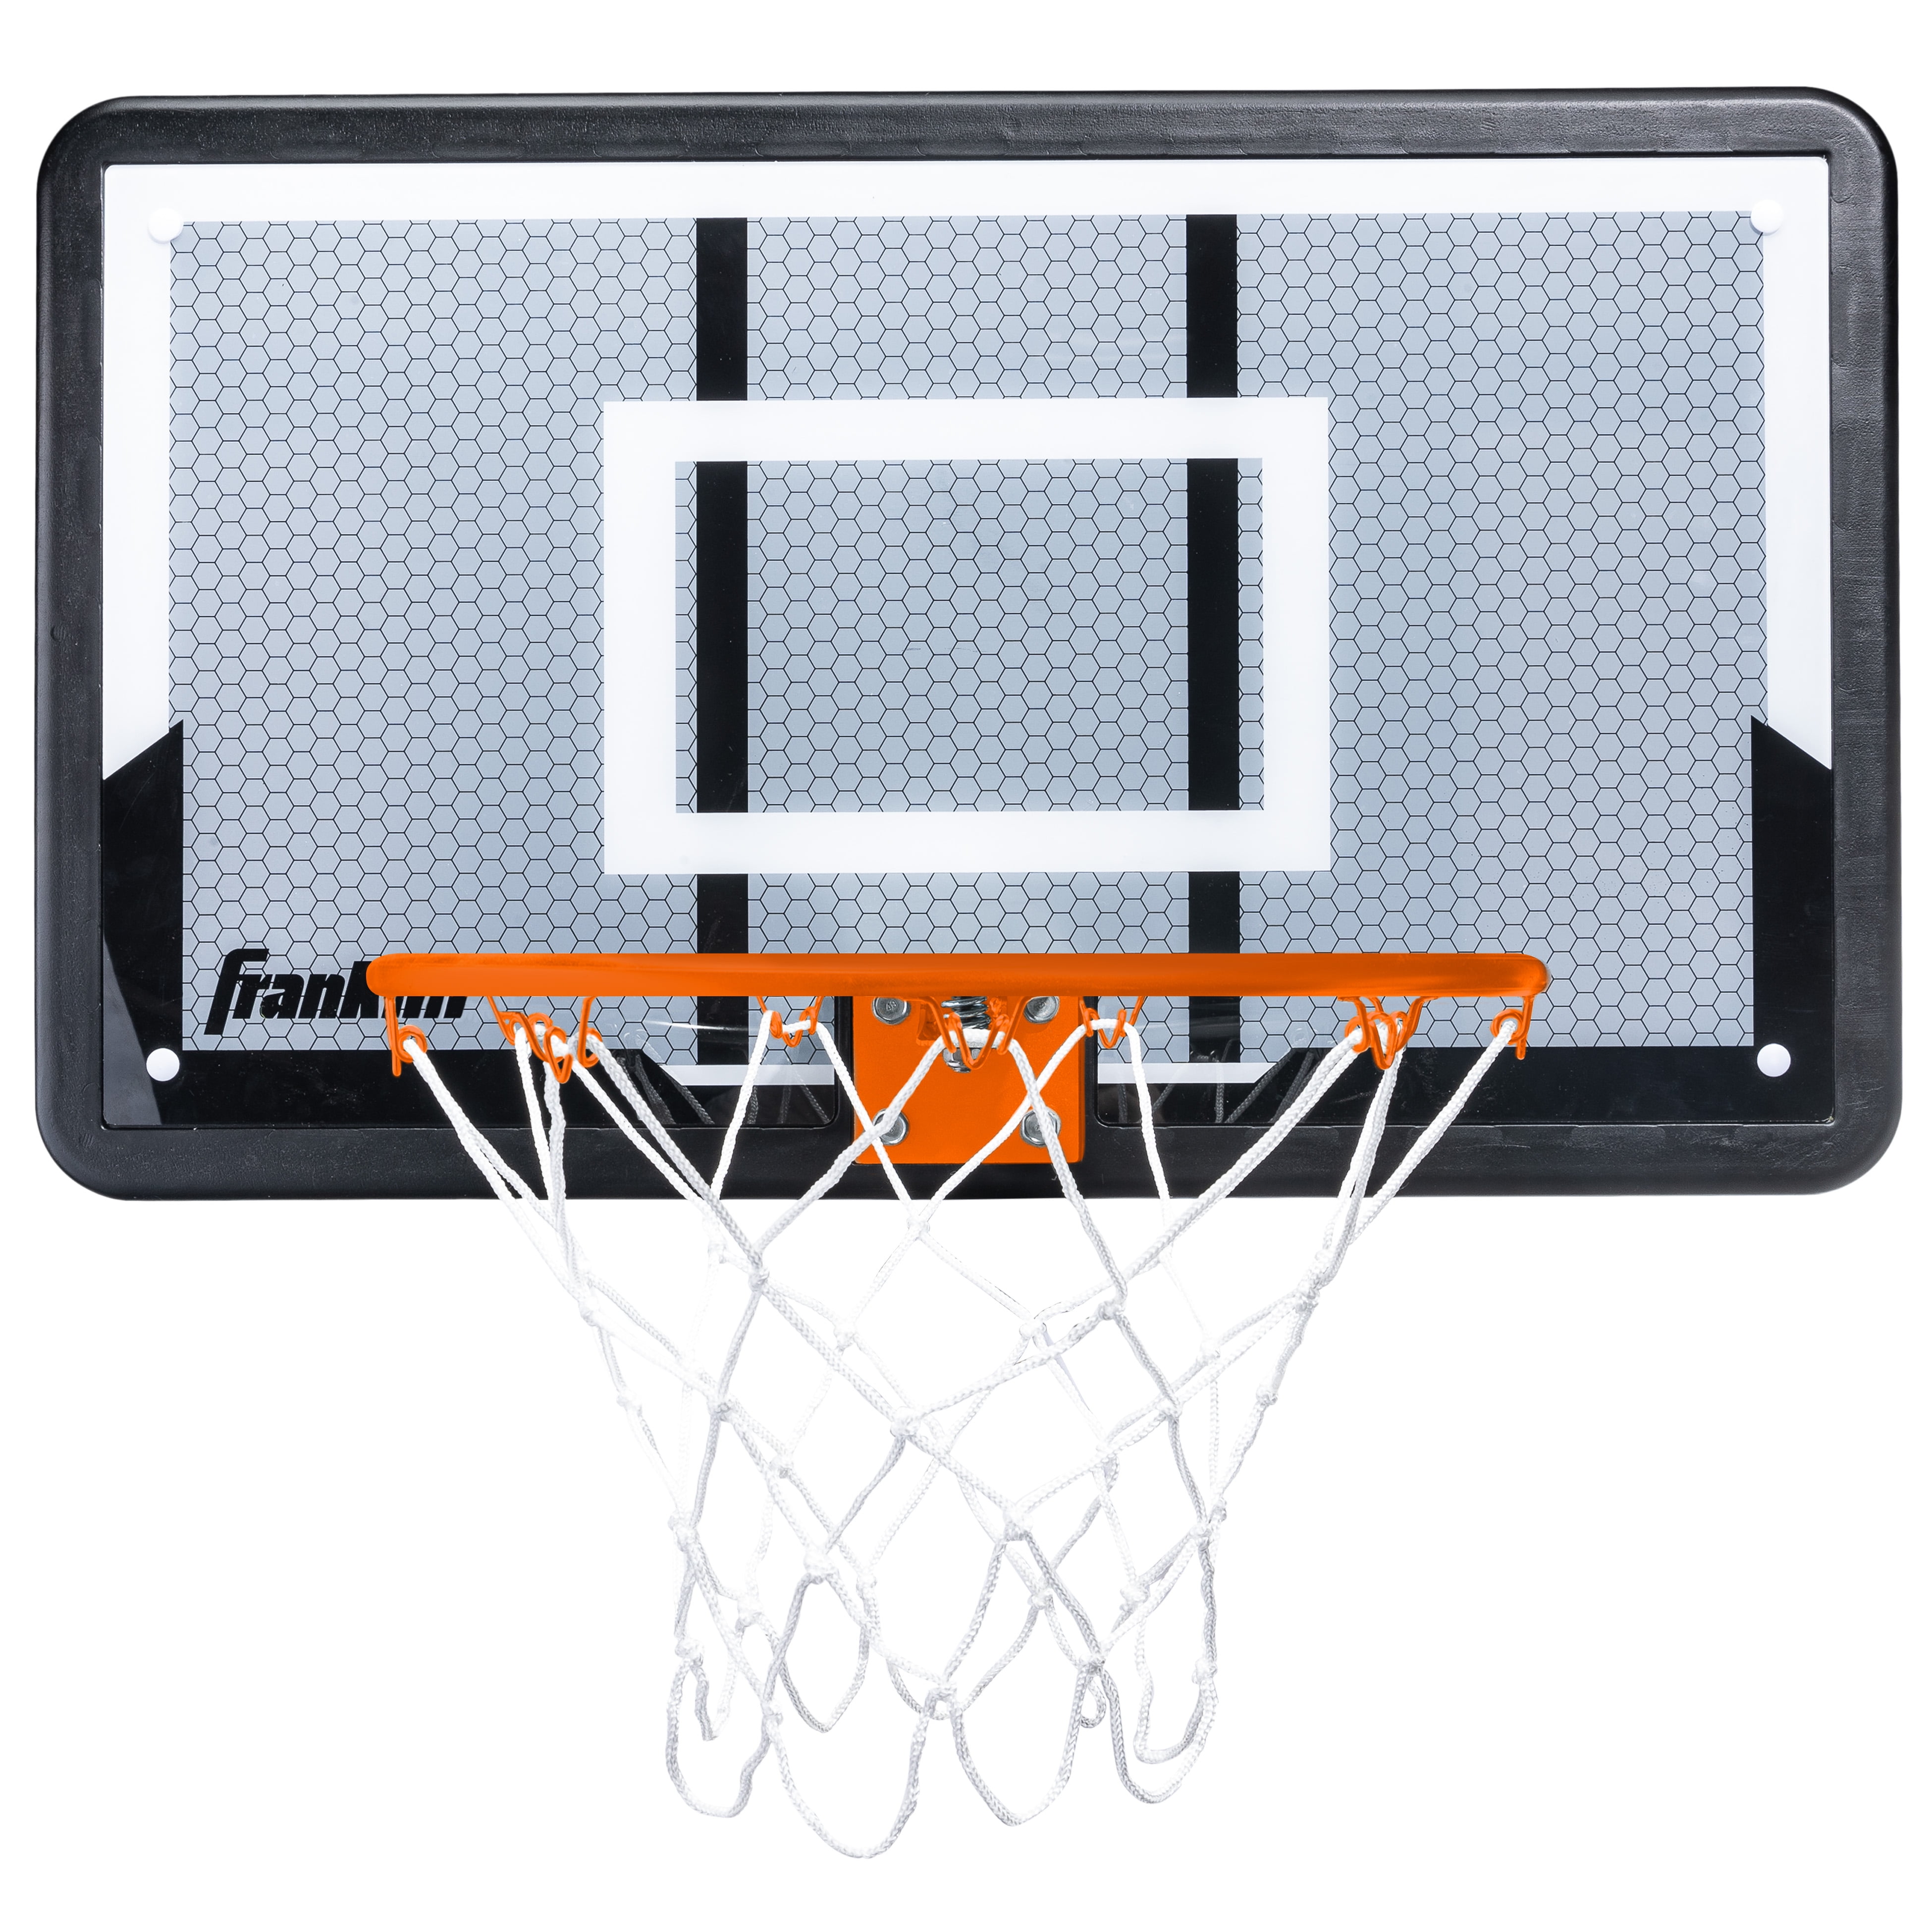 Franklin Sports Pro Mount Basketball Backboard – Authentic Polycarbonate Backboard Made for Any Kid – Can be Used Both Indoors and Out